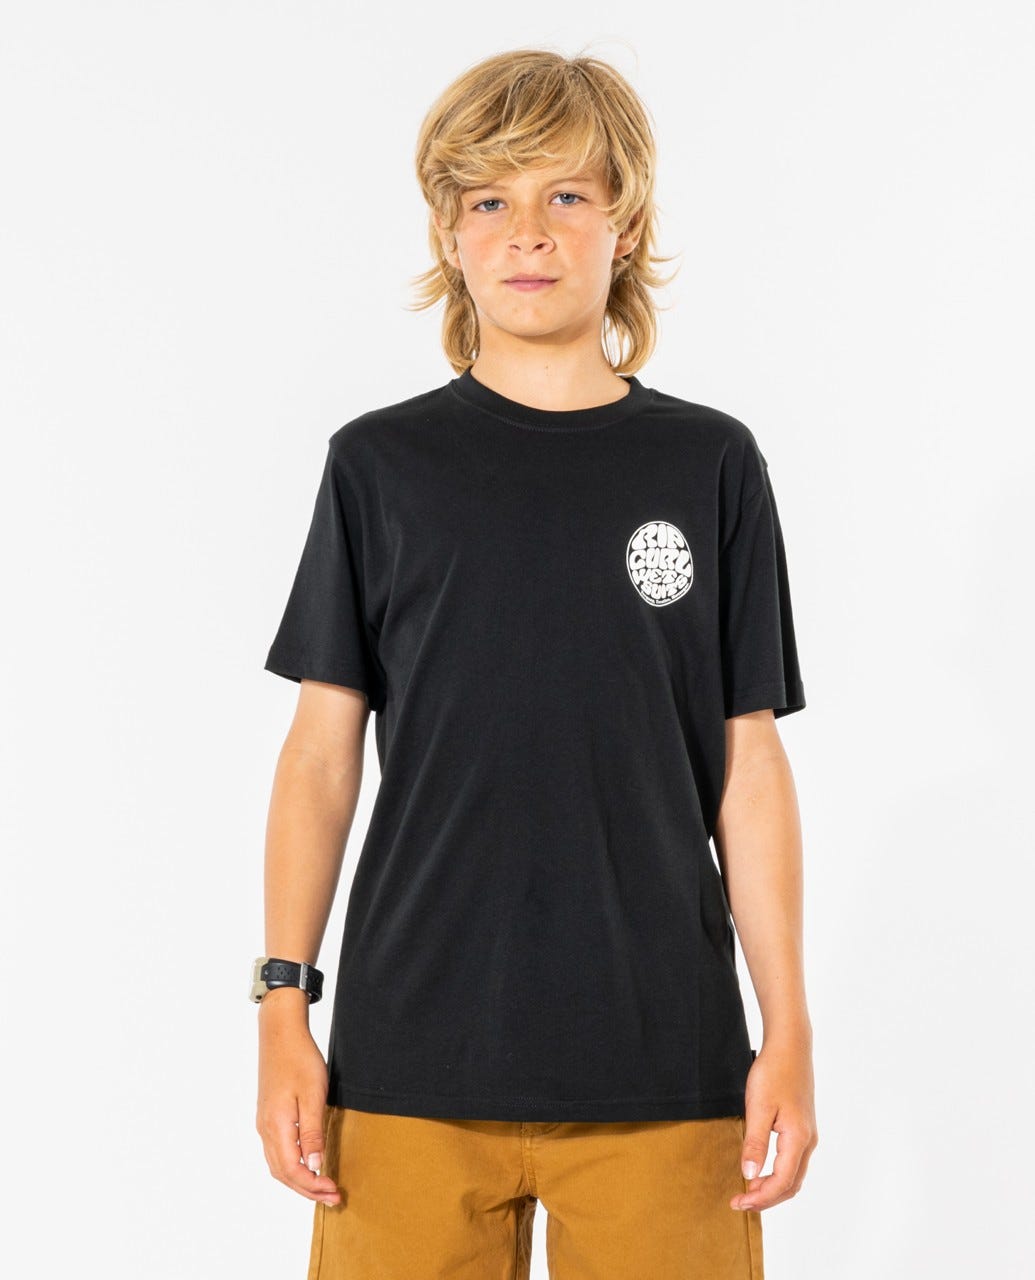 RIP CURL WETSUIT ICON KTEST9-0090 T-SHIRT SHORT SLEEVE (YB)